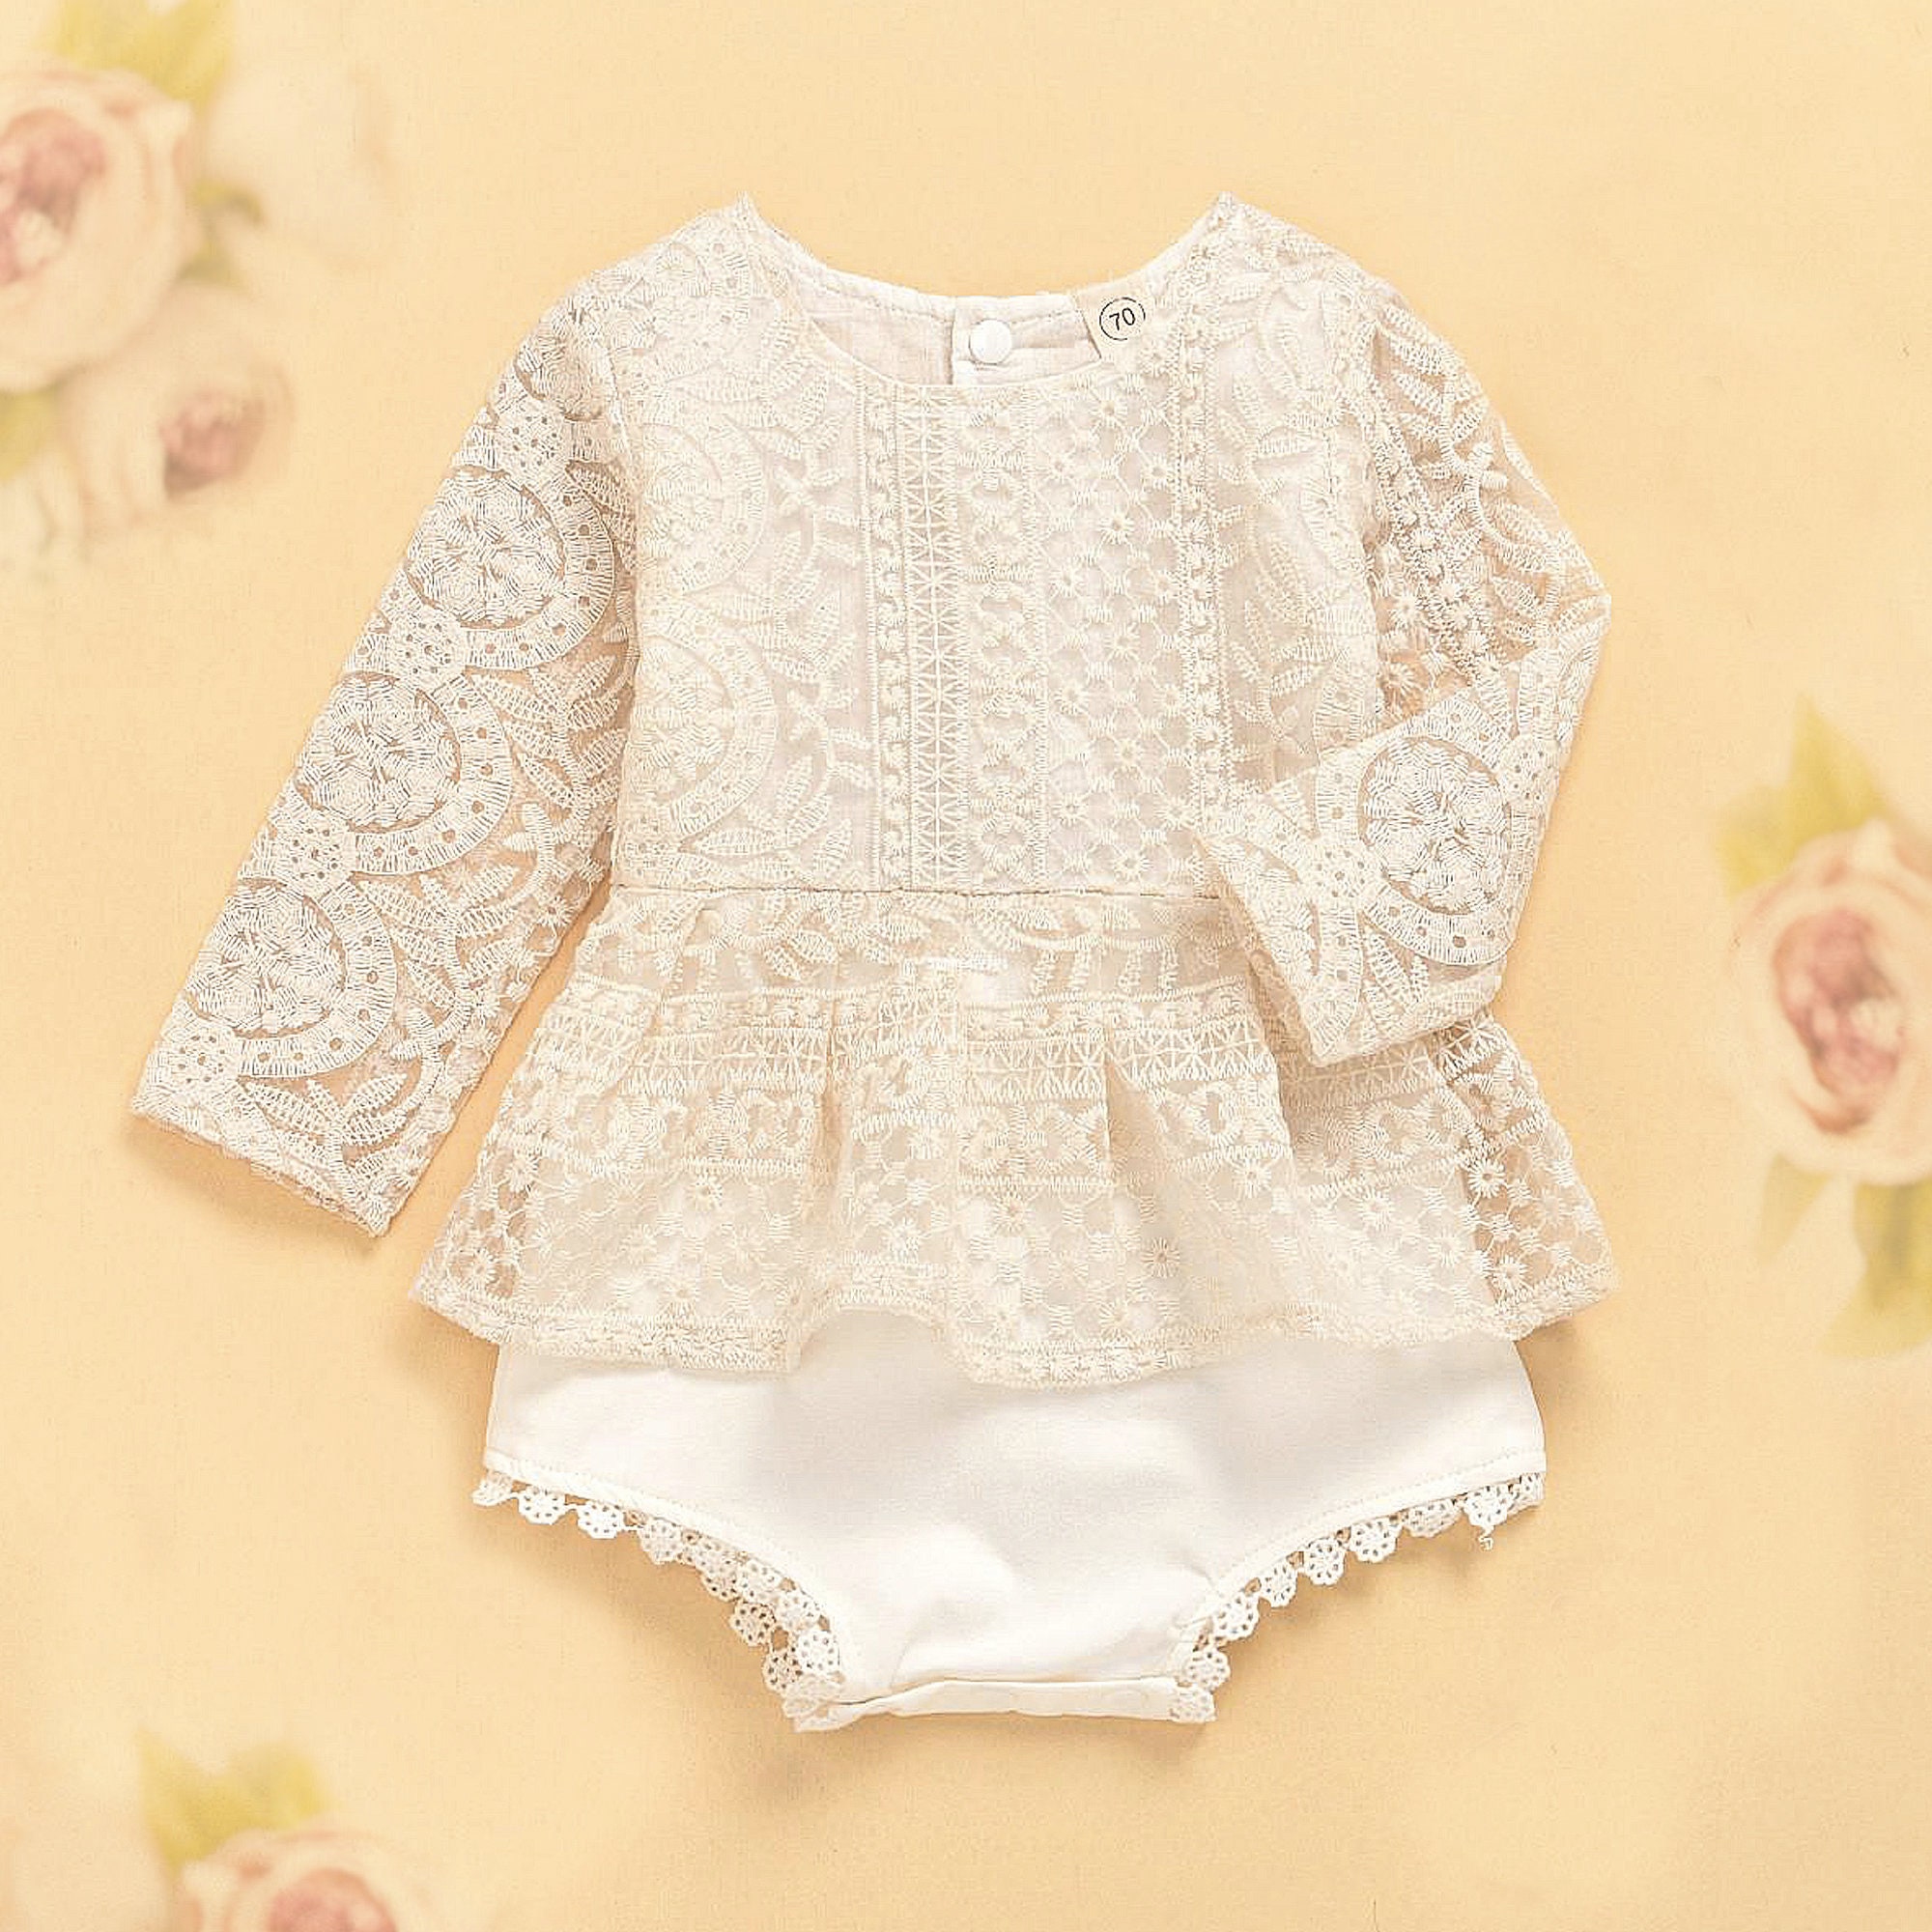 Baby Girl Lace Romper Boho Cake Smash Outfit Girl Newborn and - Etsy